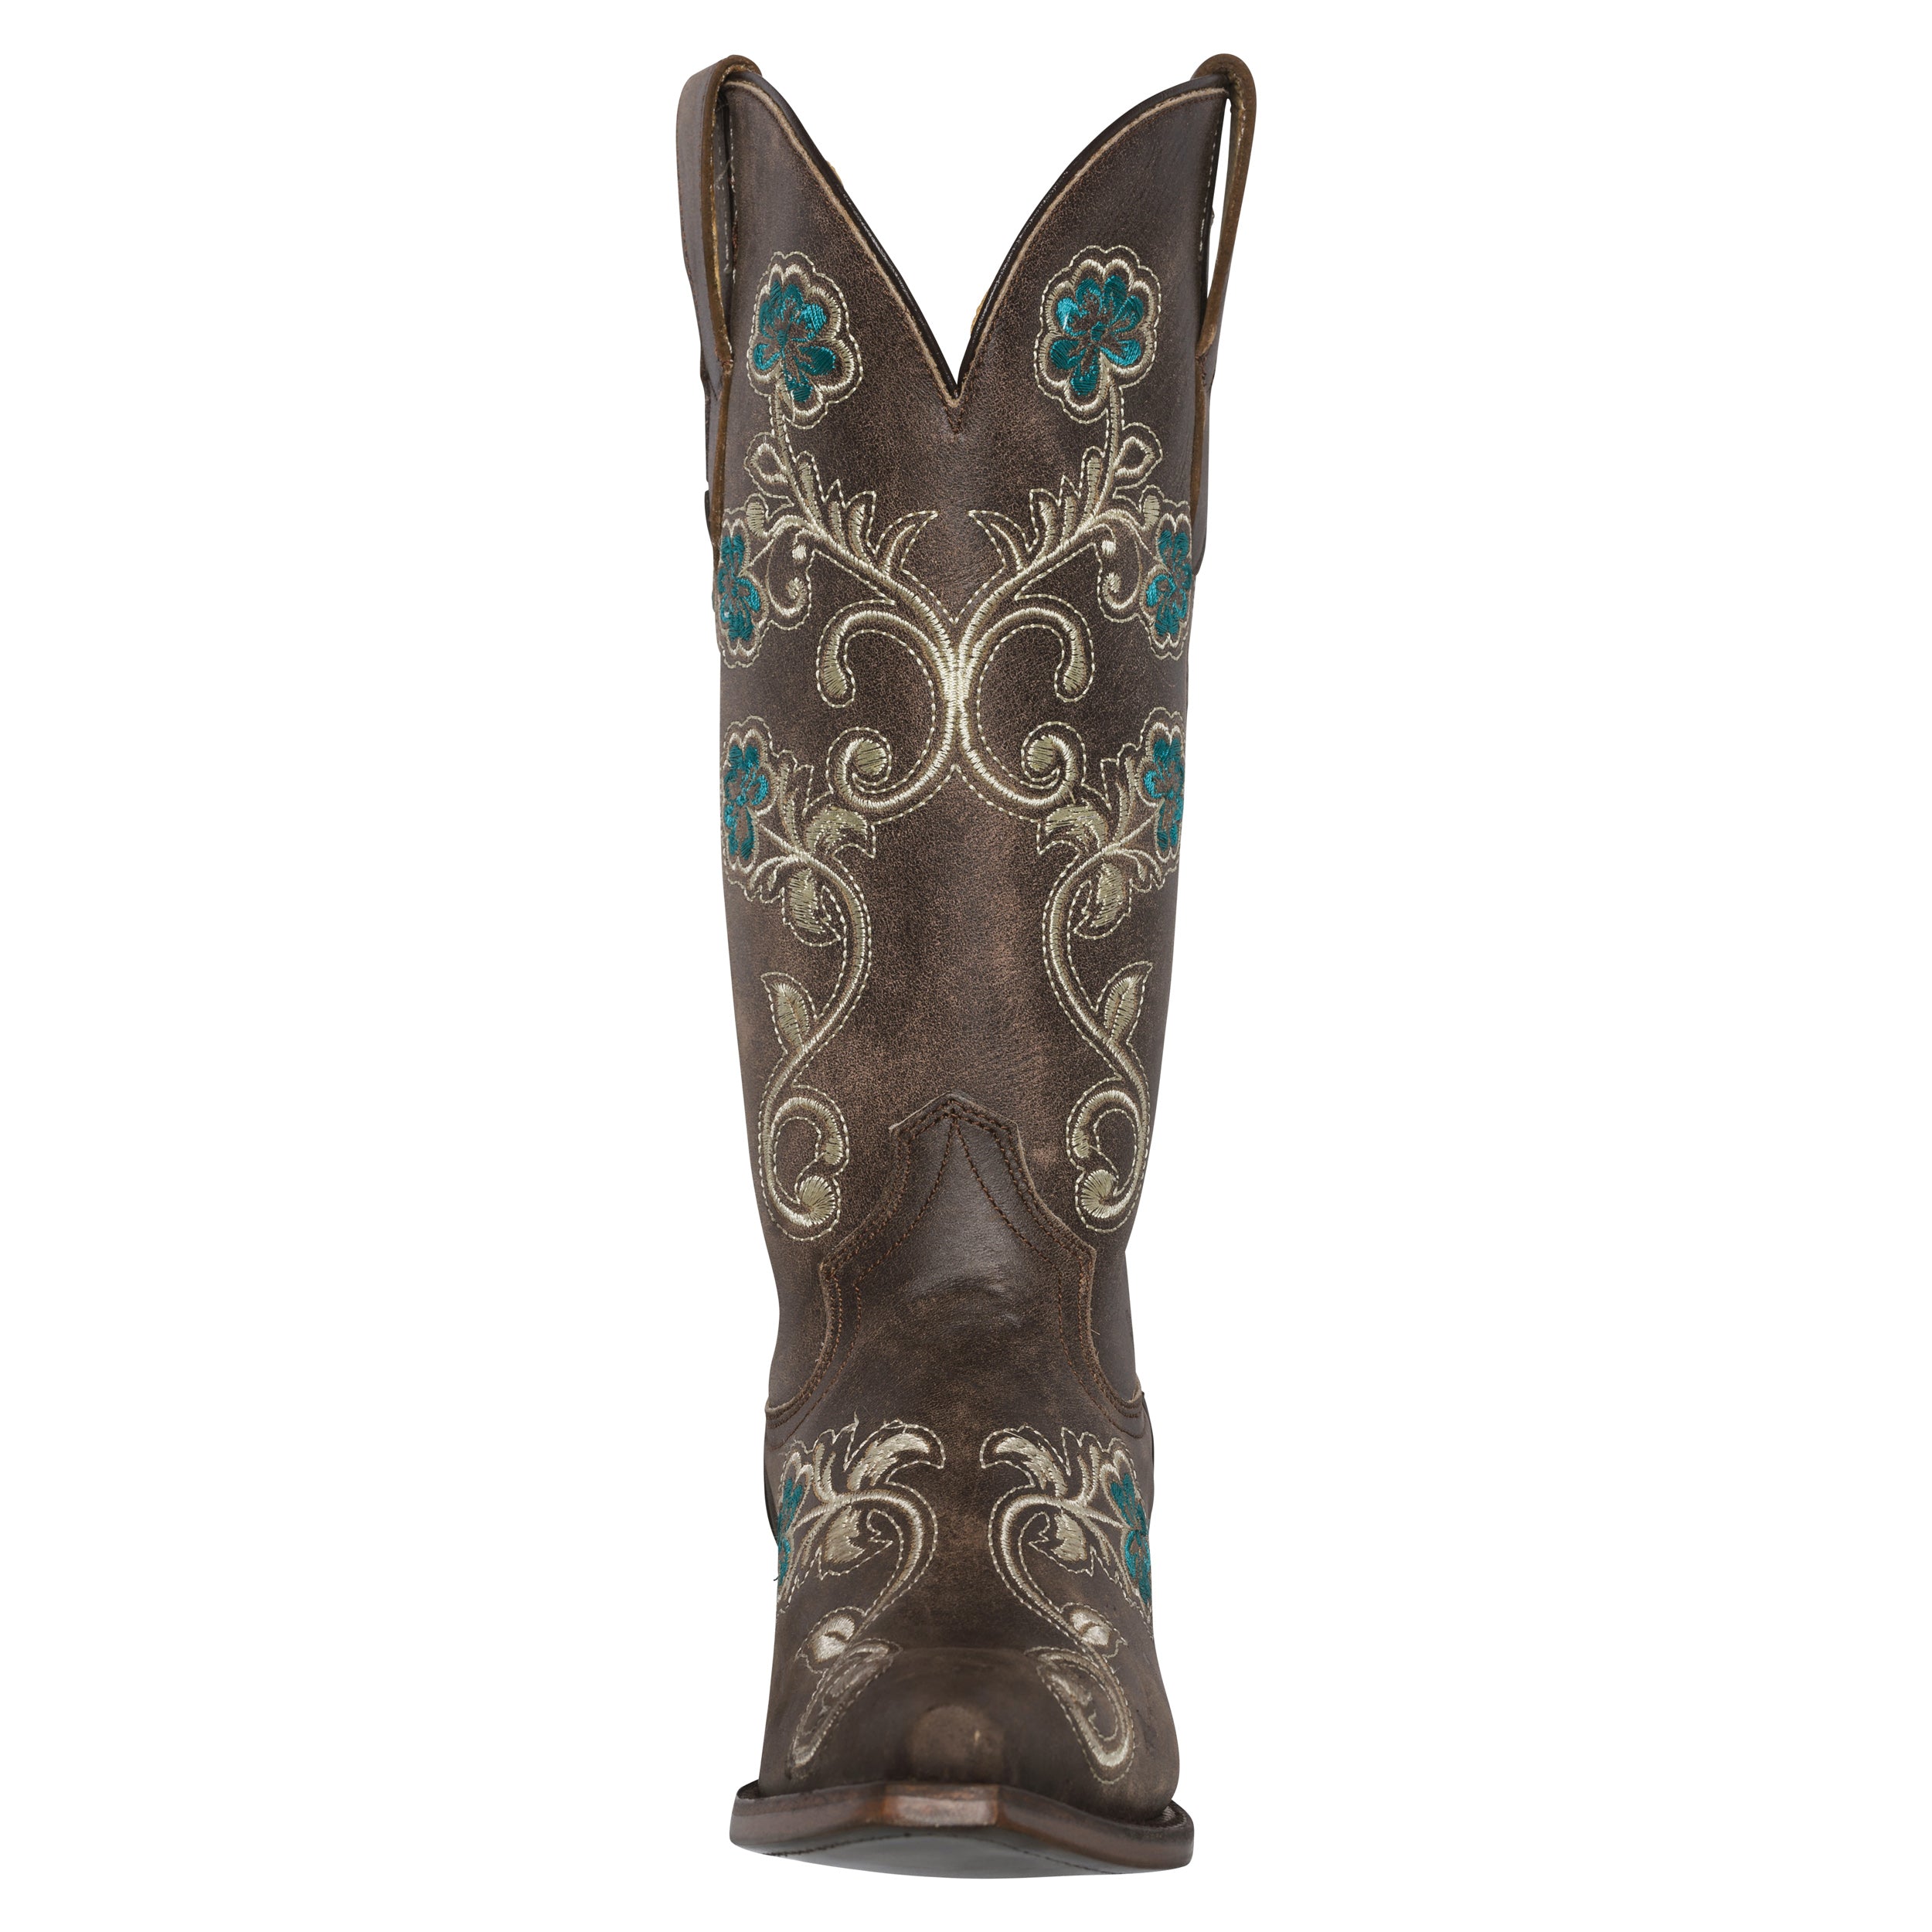 Womens Western Cowgirl Cowboy Boots, Florence Heritage Square Snip Toe by Silver Canyon, Brown, Turquoise Flowers